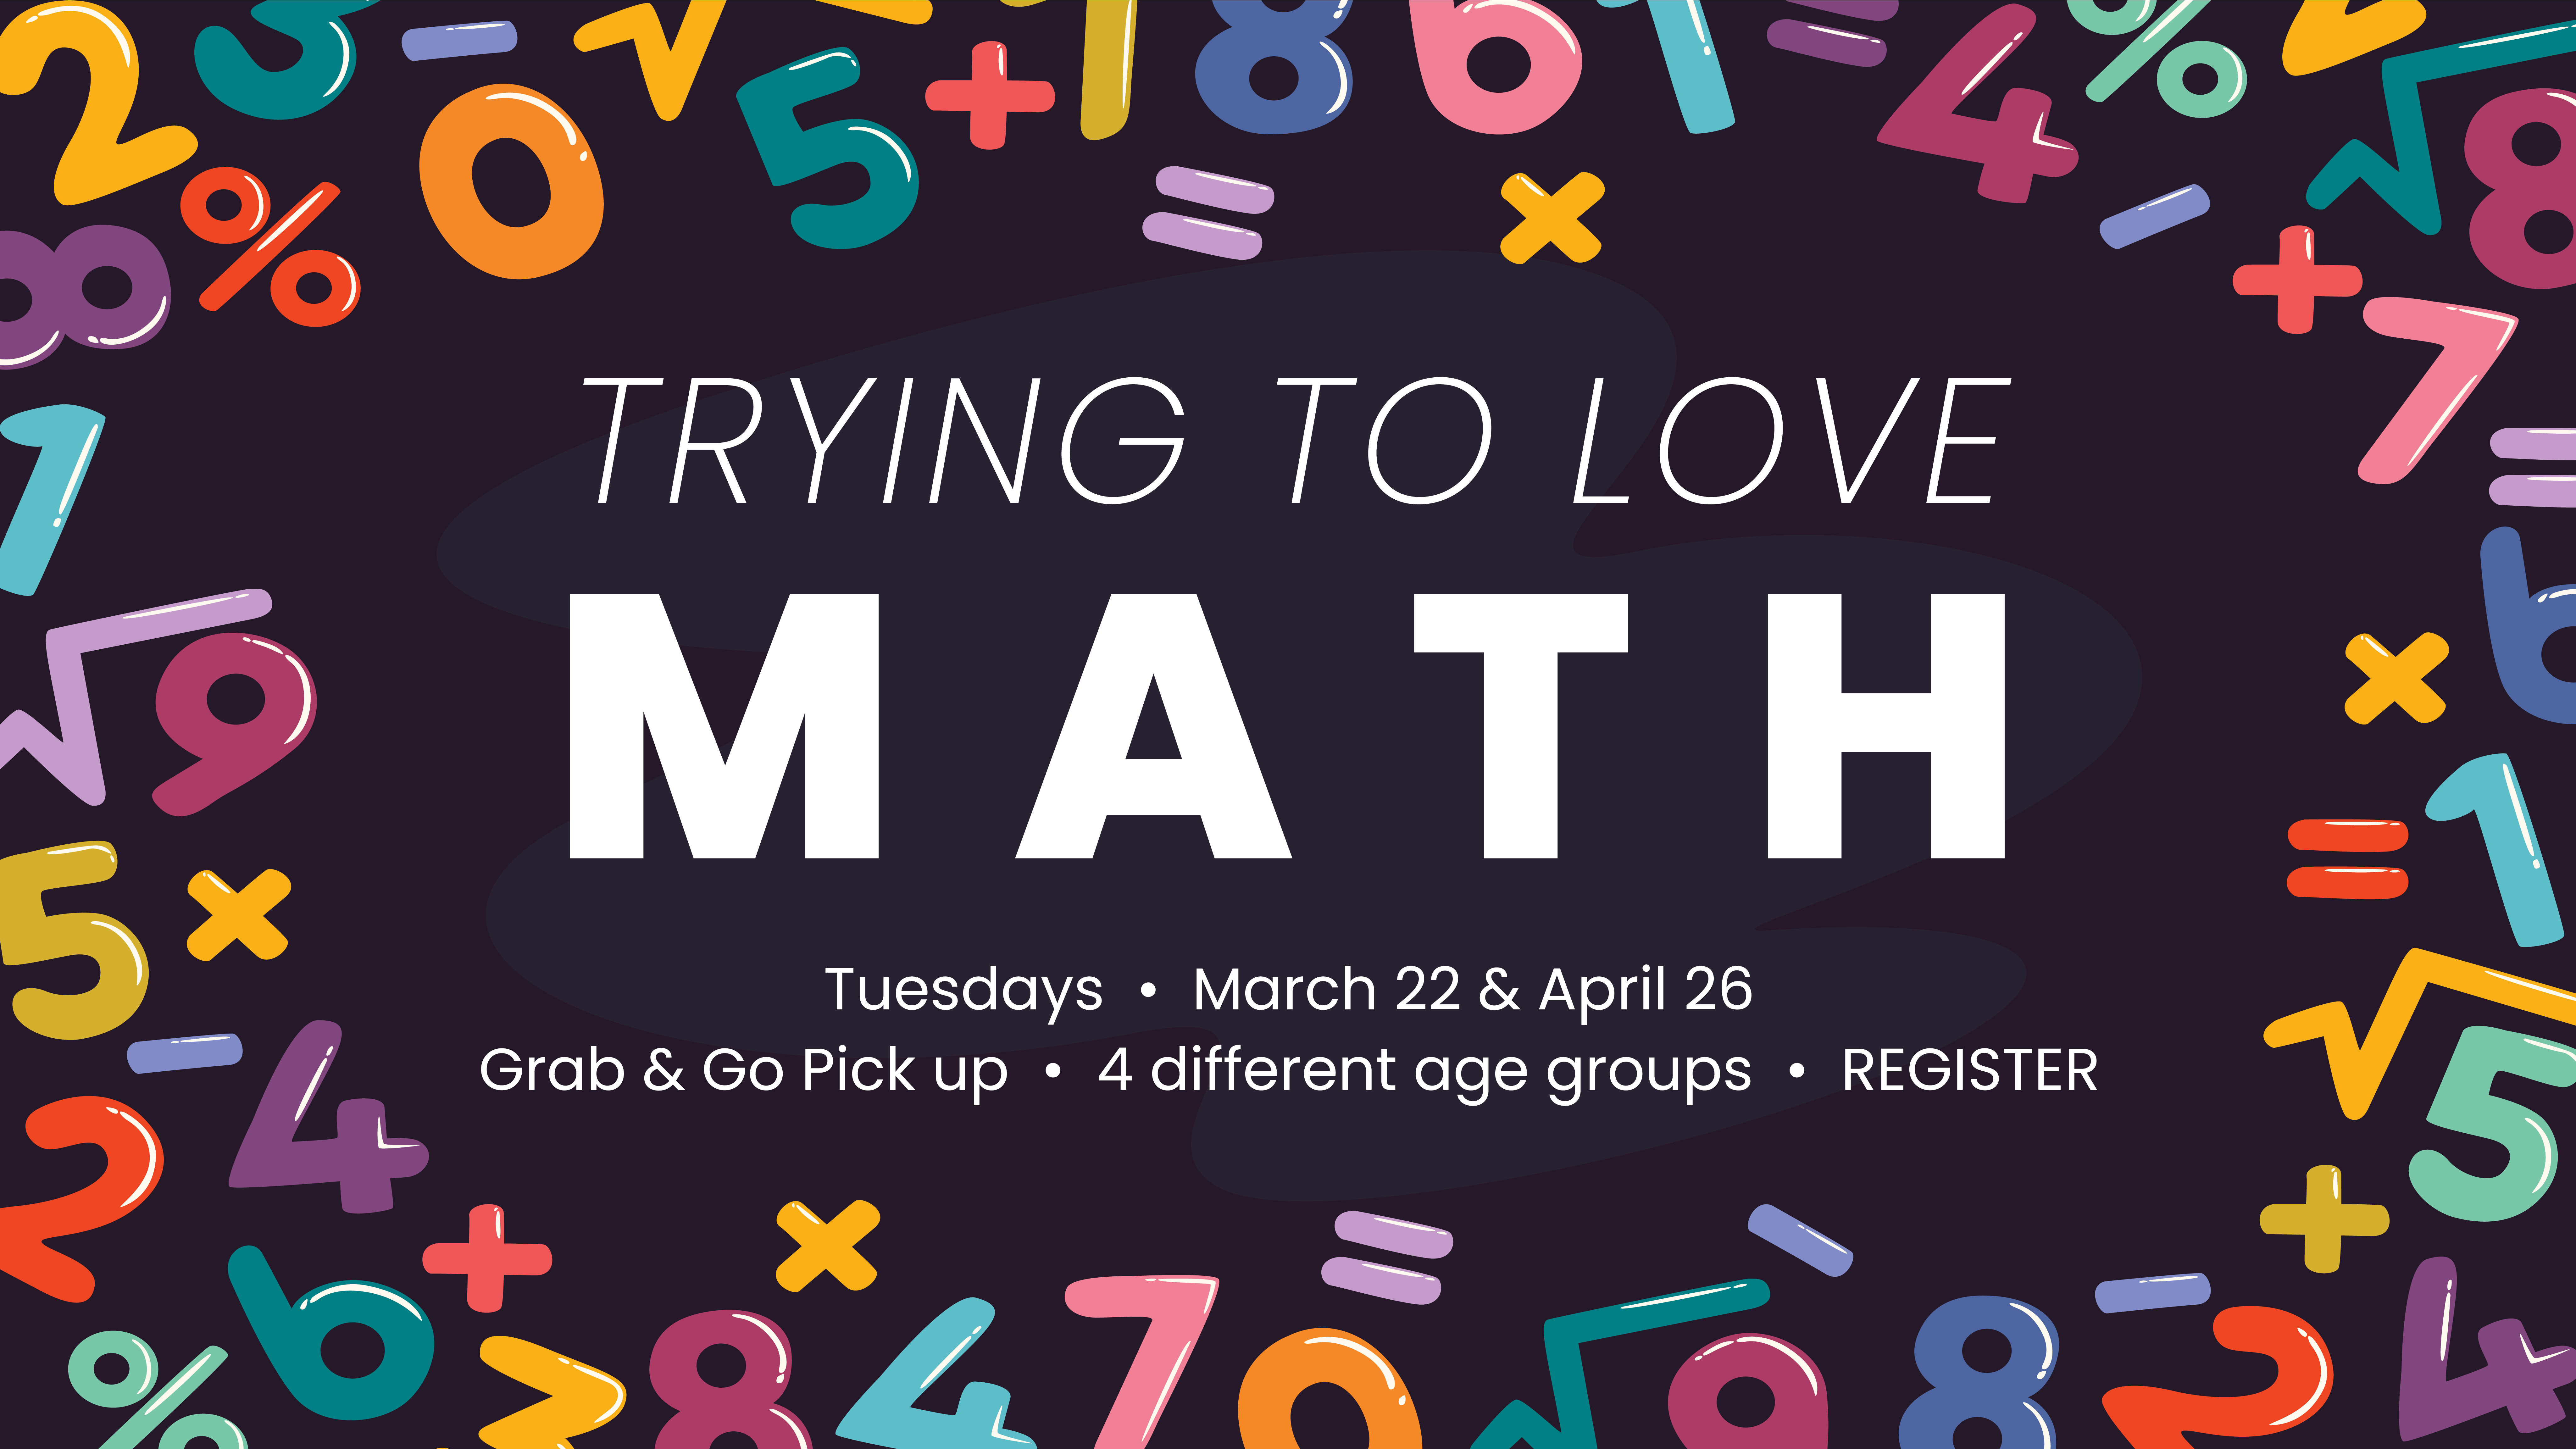 Trying to love math image